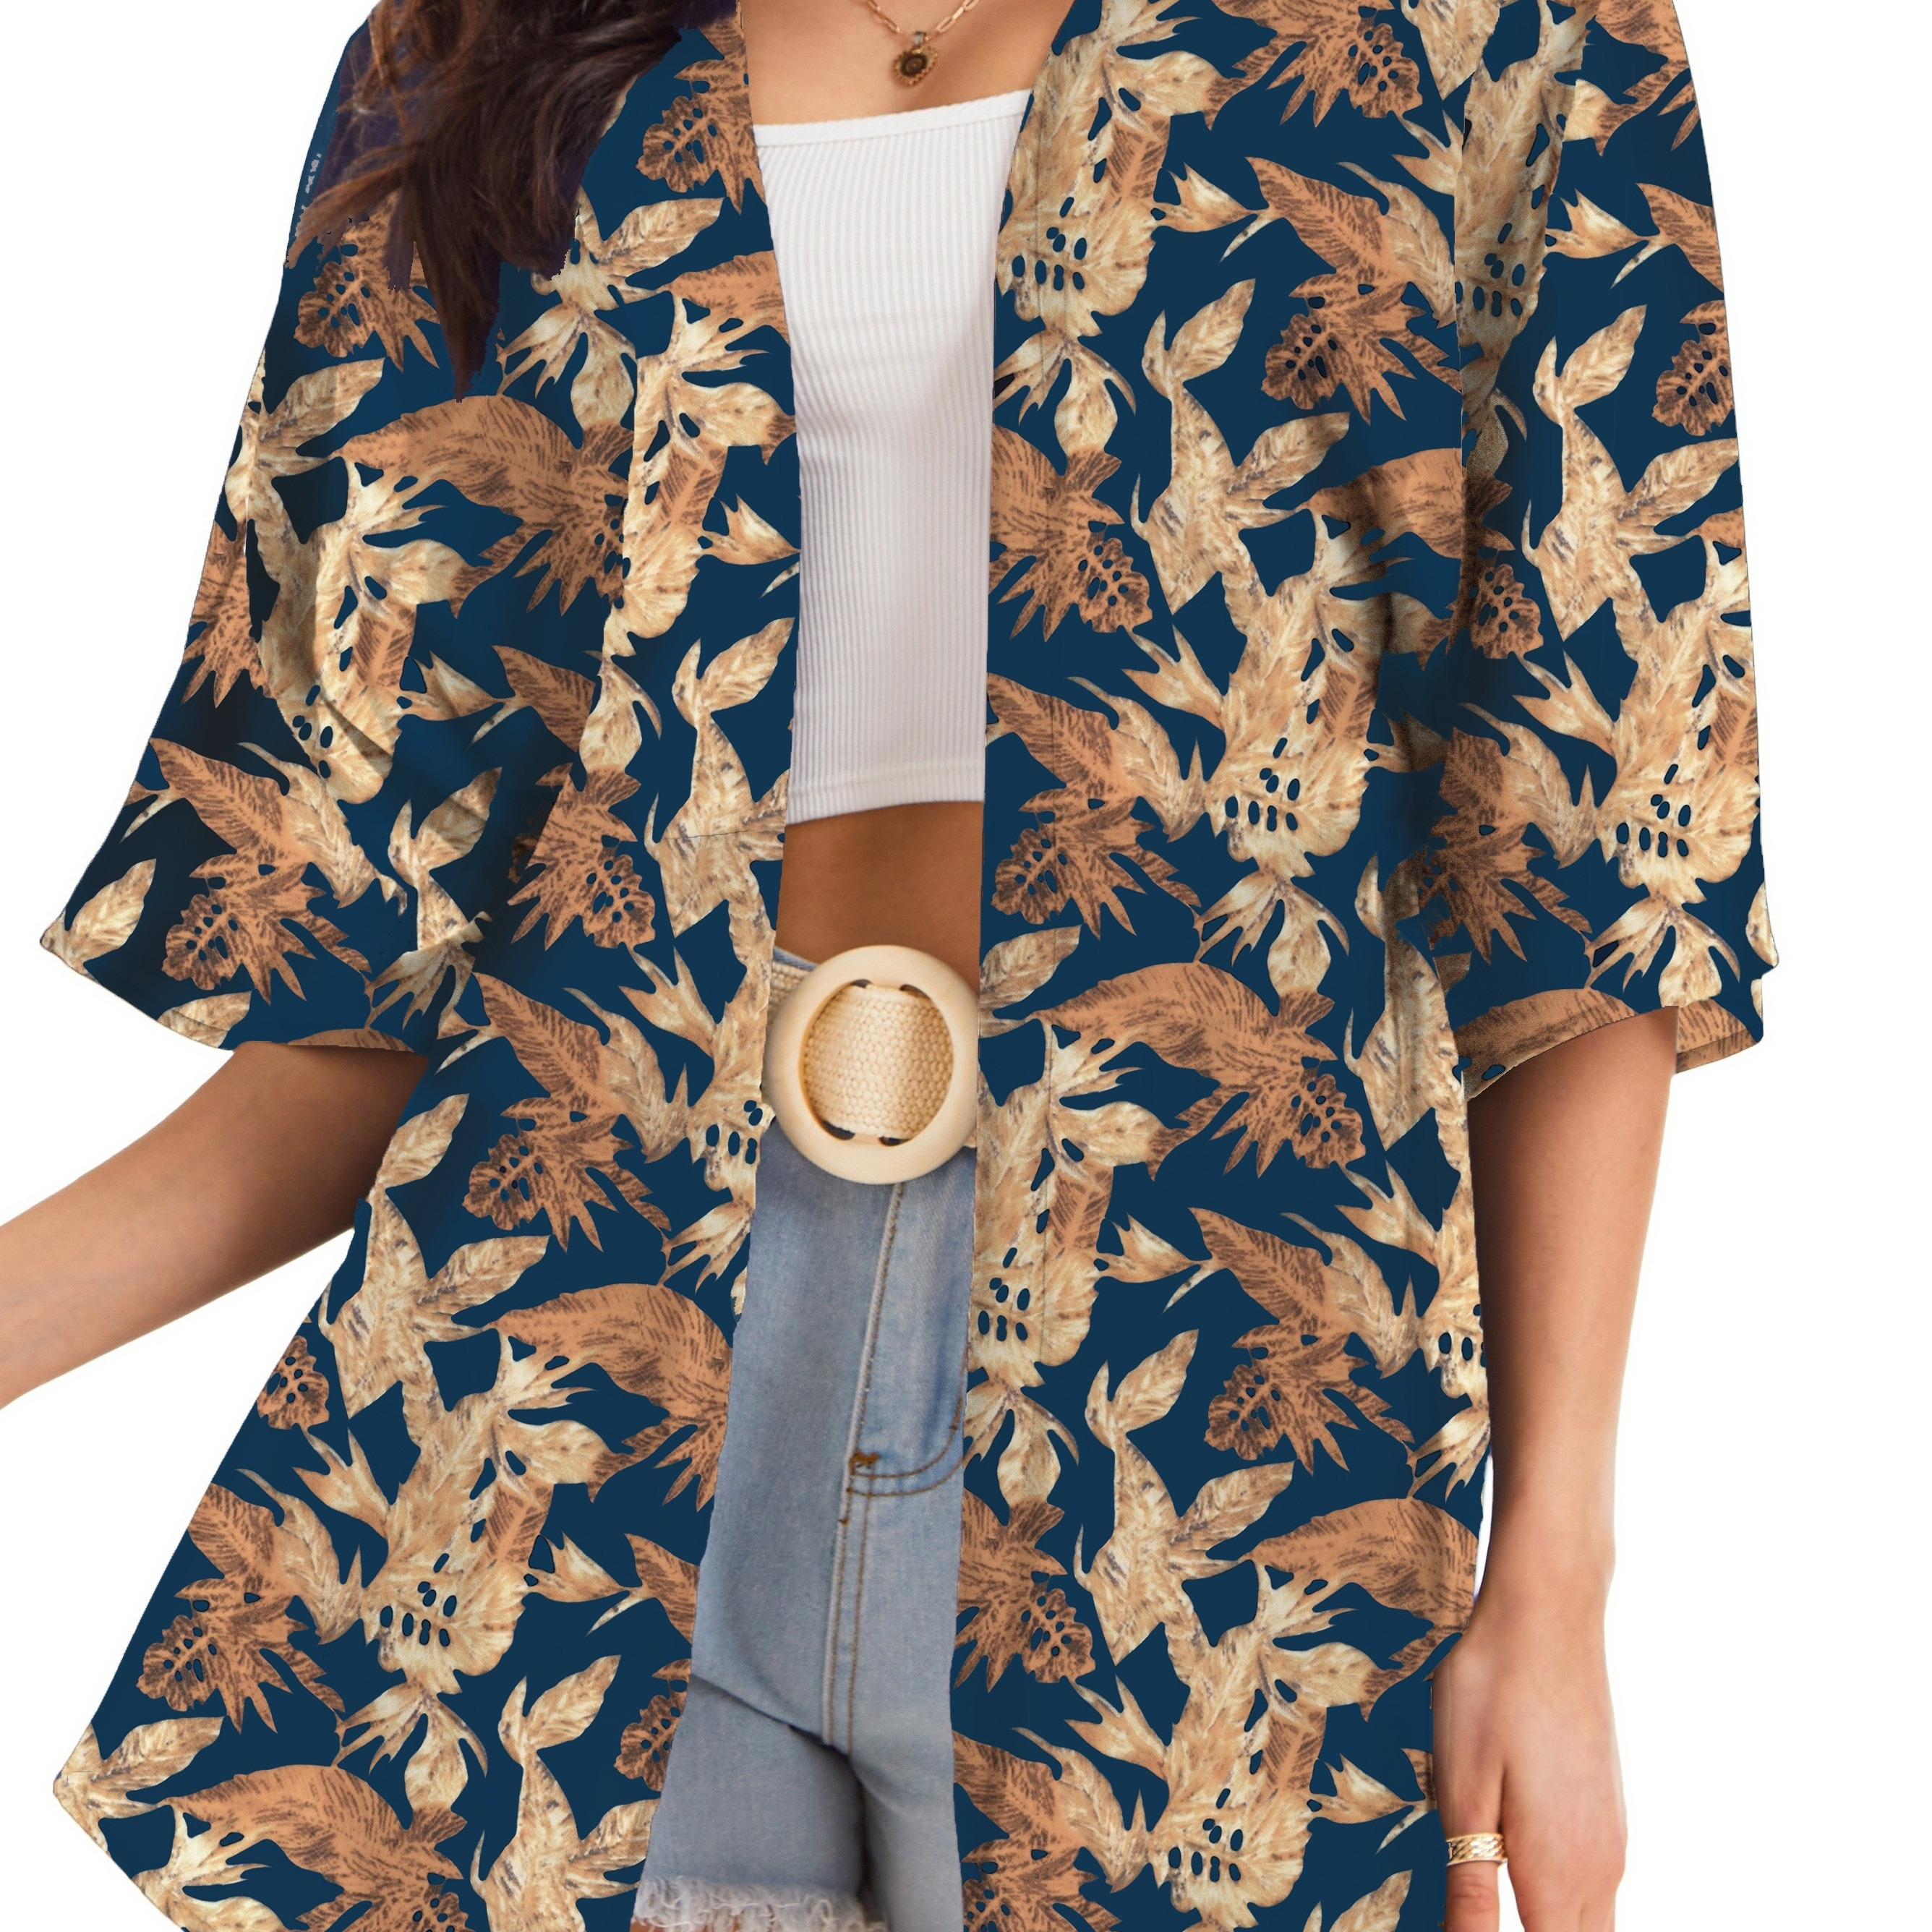 

Leaf Print Casual Cover Up, V Neck Semi-sheer Loose Fit Beach Cardigan, Women's Swimwear & Clothing